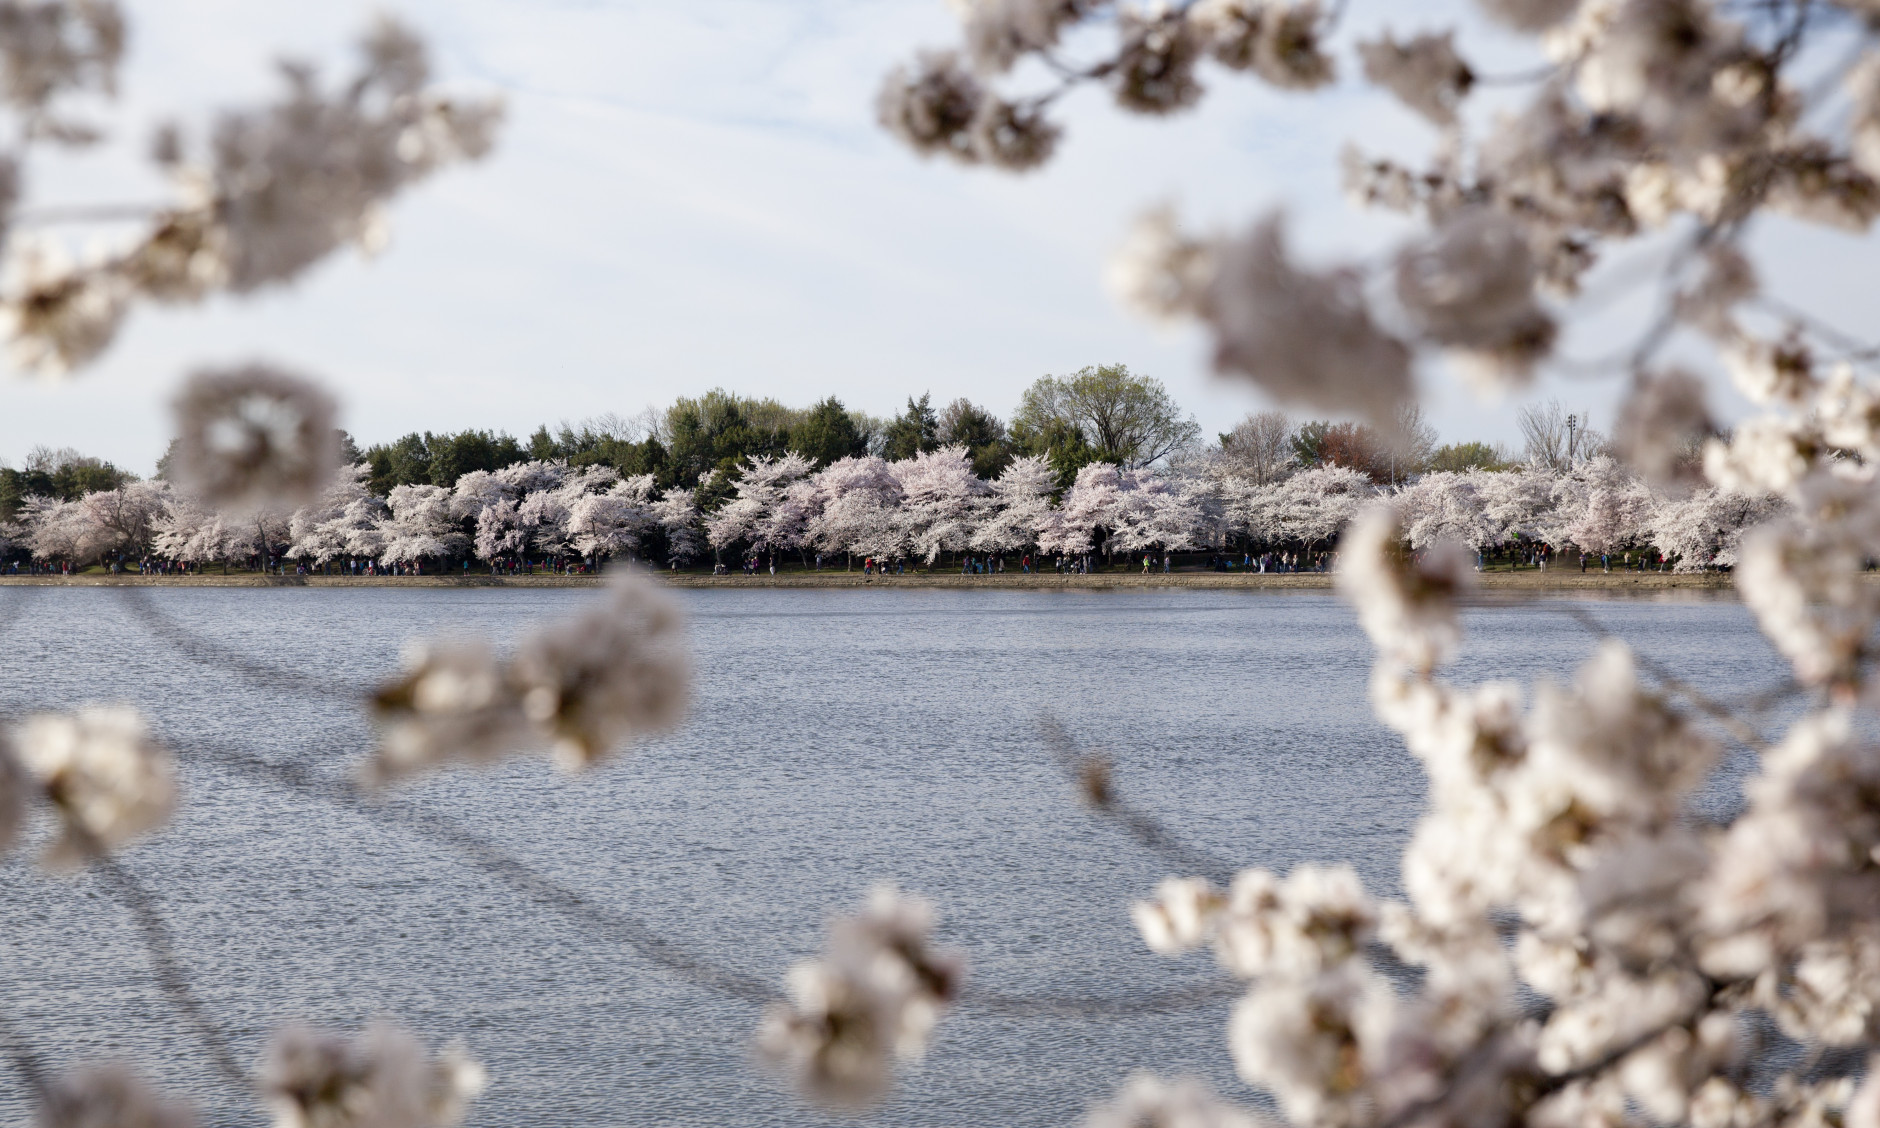 Cherry trees at full bloom are seen around the Tidal Basin, Saturday, April 11, 2015, in Washington. (AP Photo/Carolyn Kaster)